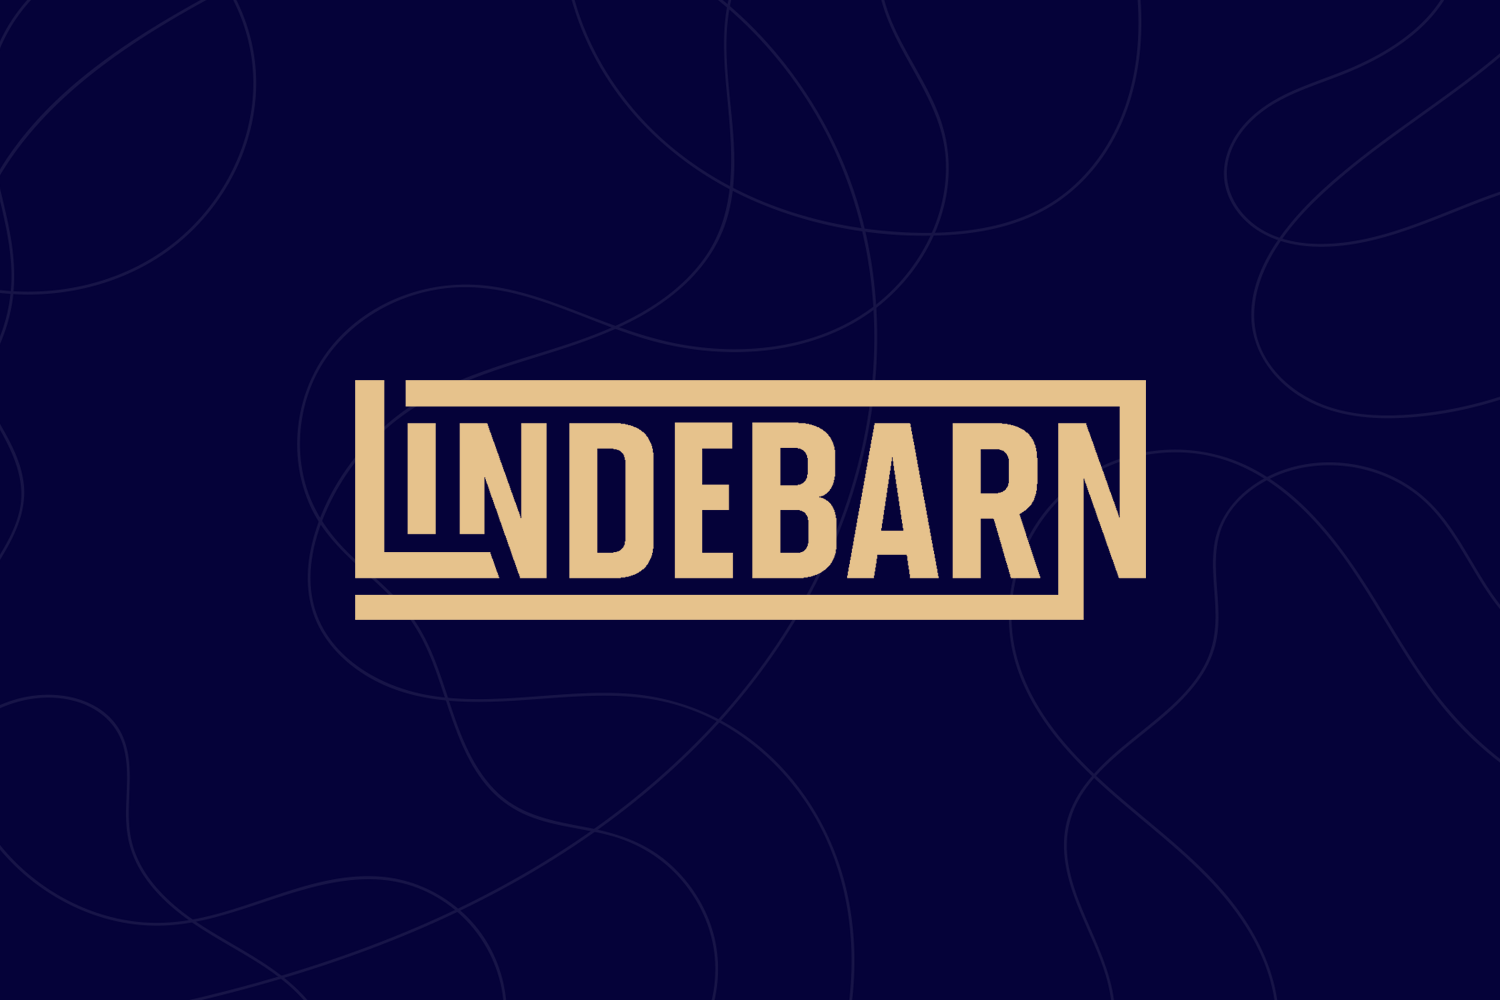 featured image lindebarn gold on blue